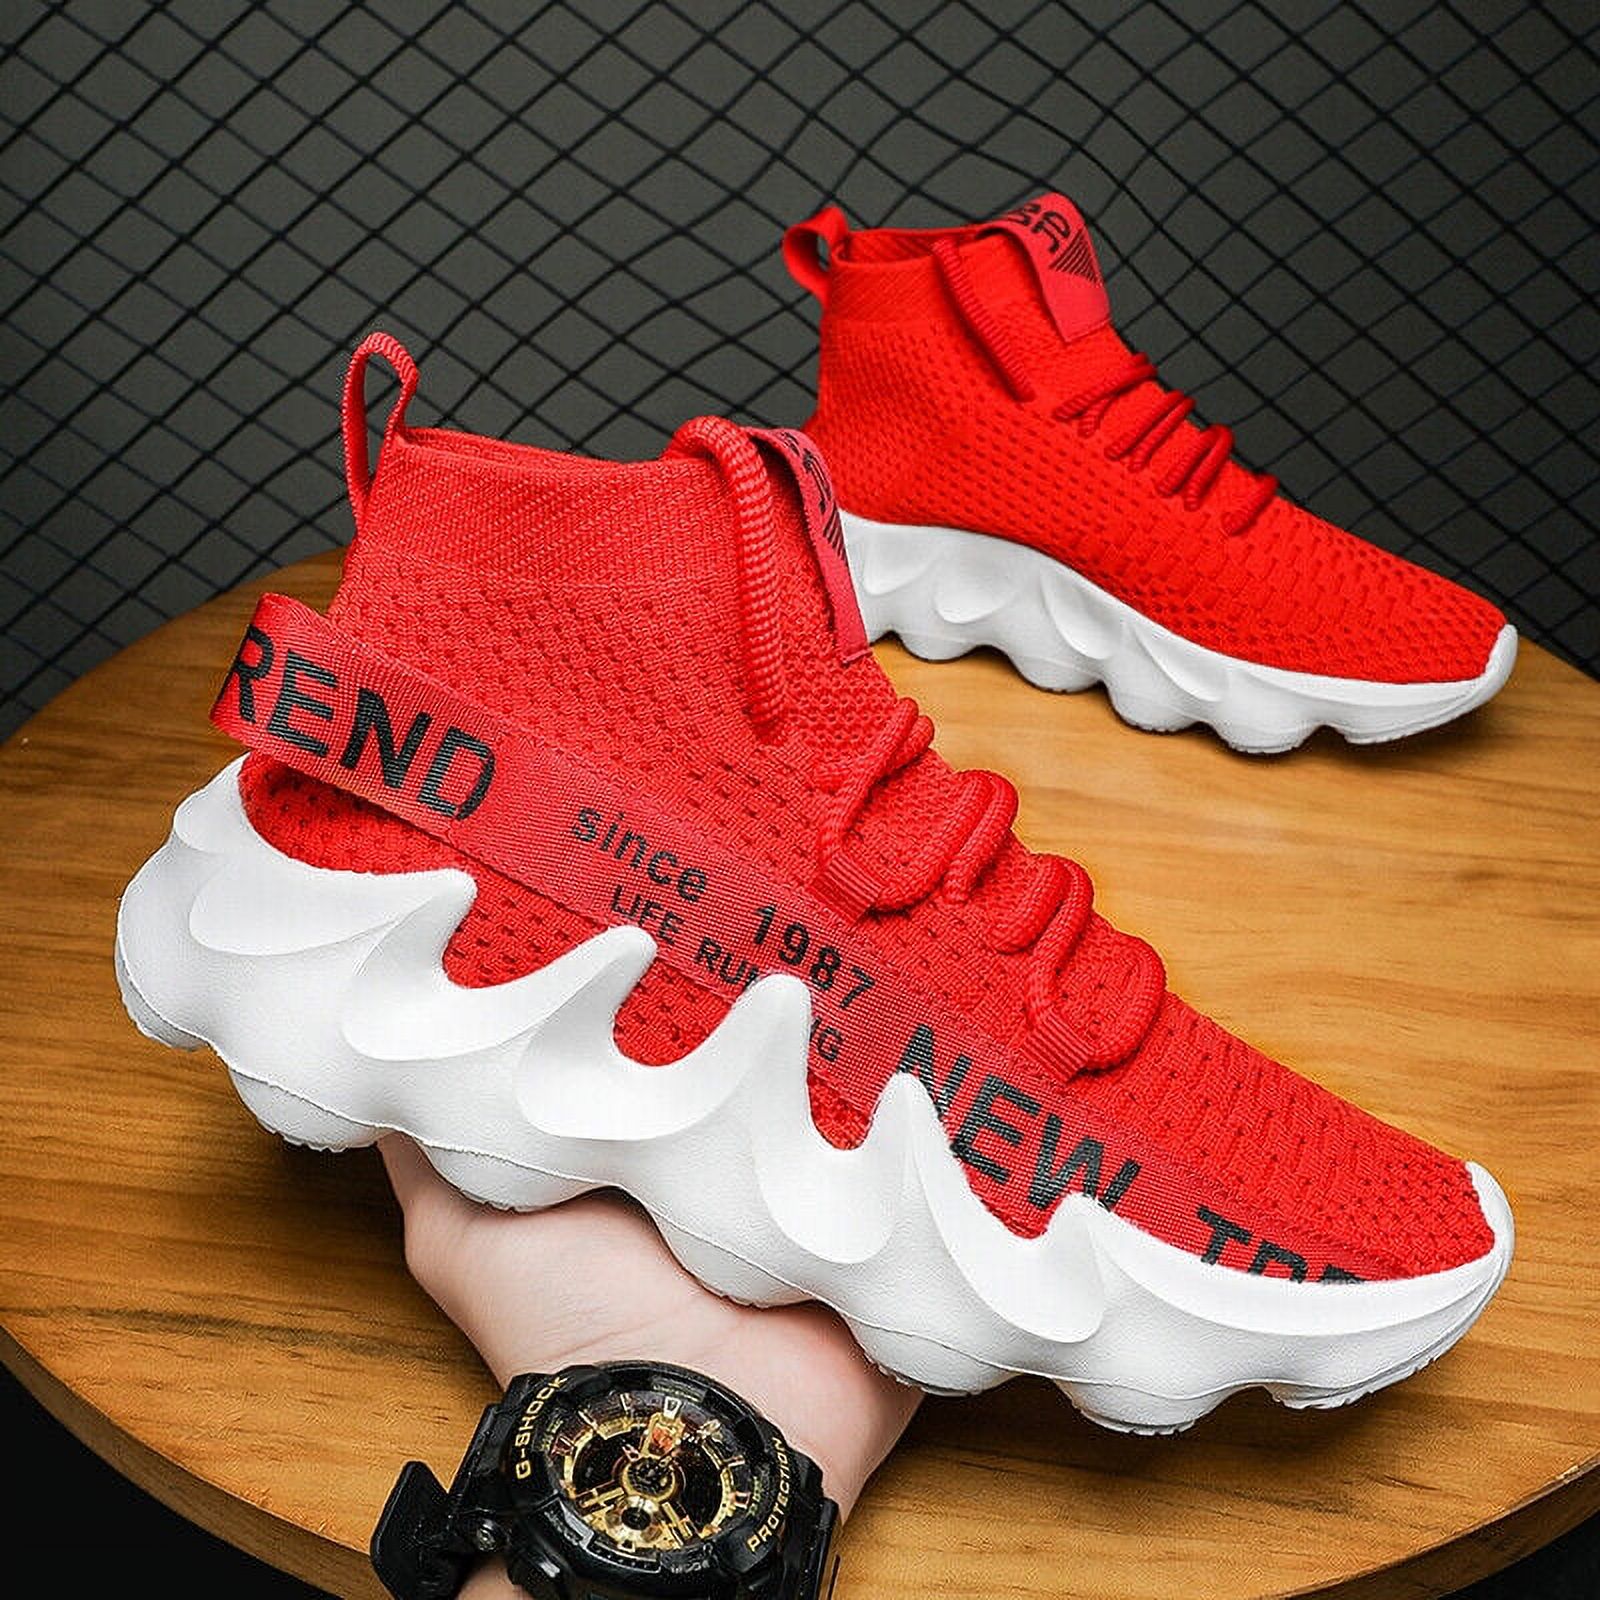 Running Shoes Sneakers Casual Men's Outdoor Athletic Jogging Sports Tennis Gym - image 1 of 17